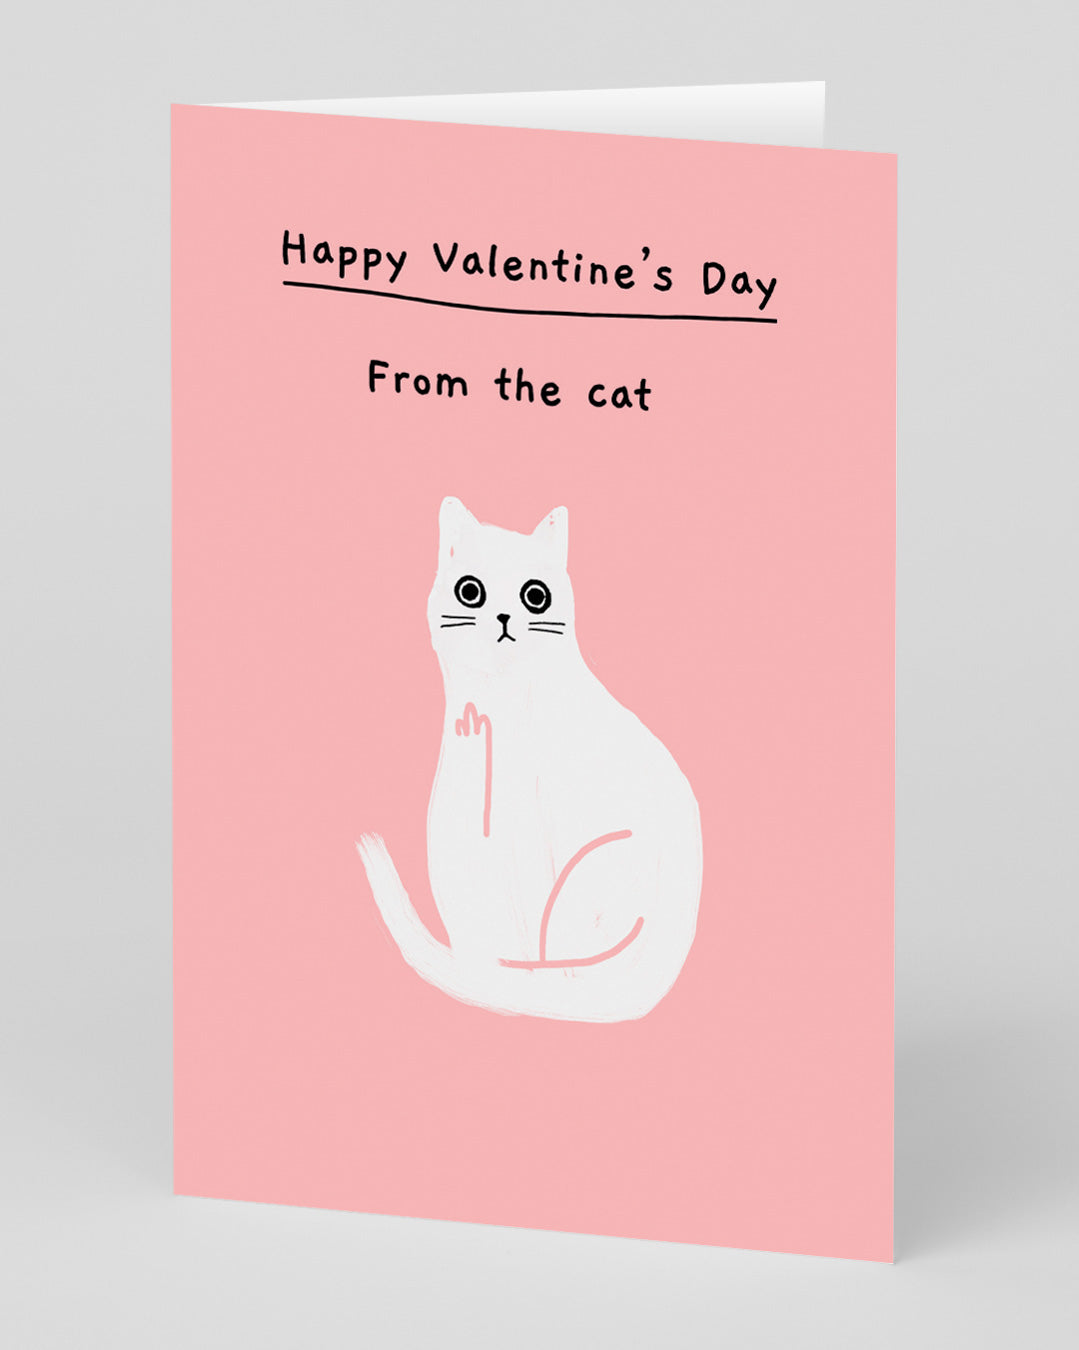 Valentine’s Day | Funny Valentines Card For Cat Lovers | Personalised Happy Valentine’s Day from the Cat Card | Ohh Deer Unique Valentine’s Card for Him or Her | Artwork by Ken The Cat | Made In The UK, Eco-Friendly Materials, Plastic Free Packaging